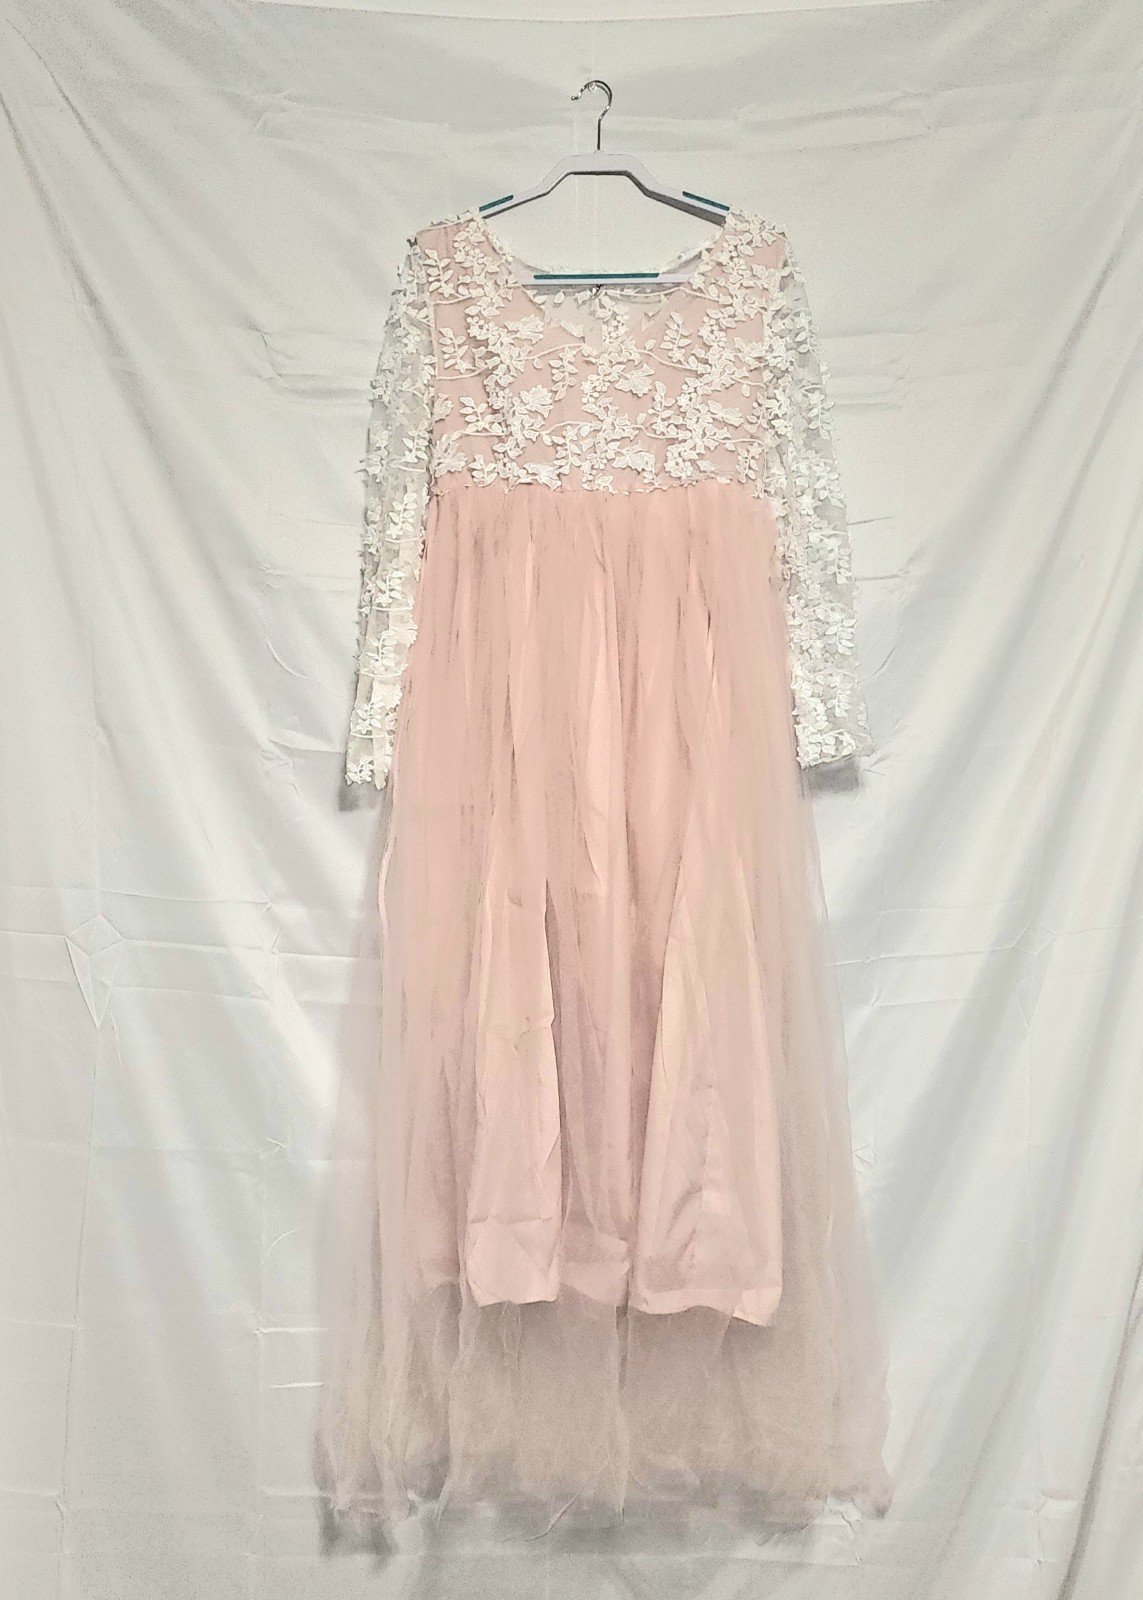 Tulle & Lace Maternity Dress, Pink/White, Size 2X 6xevW